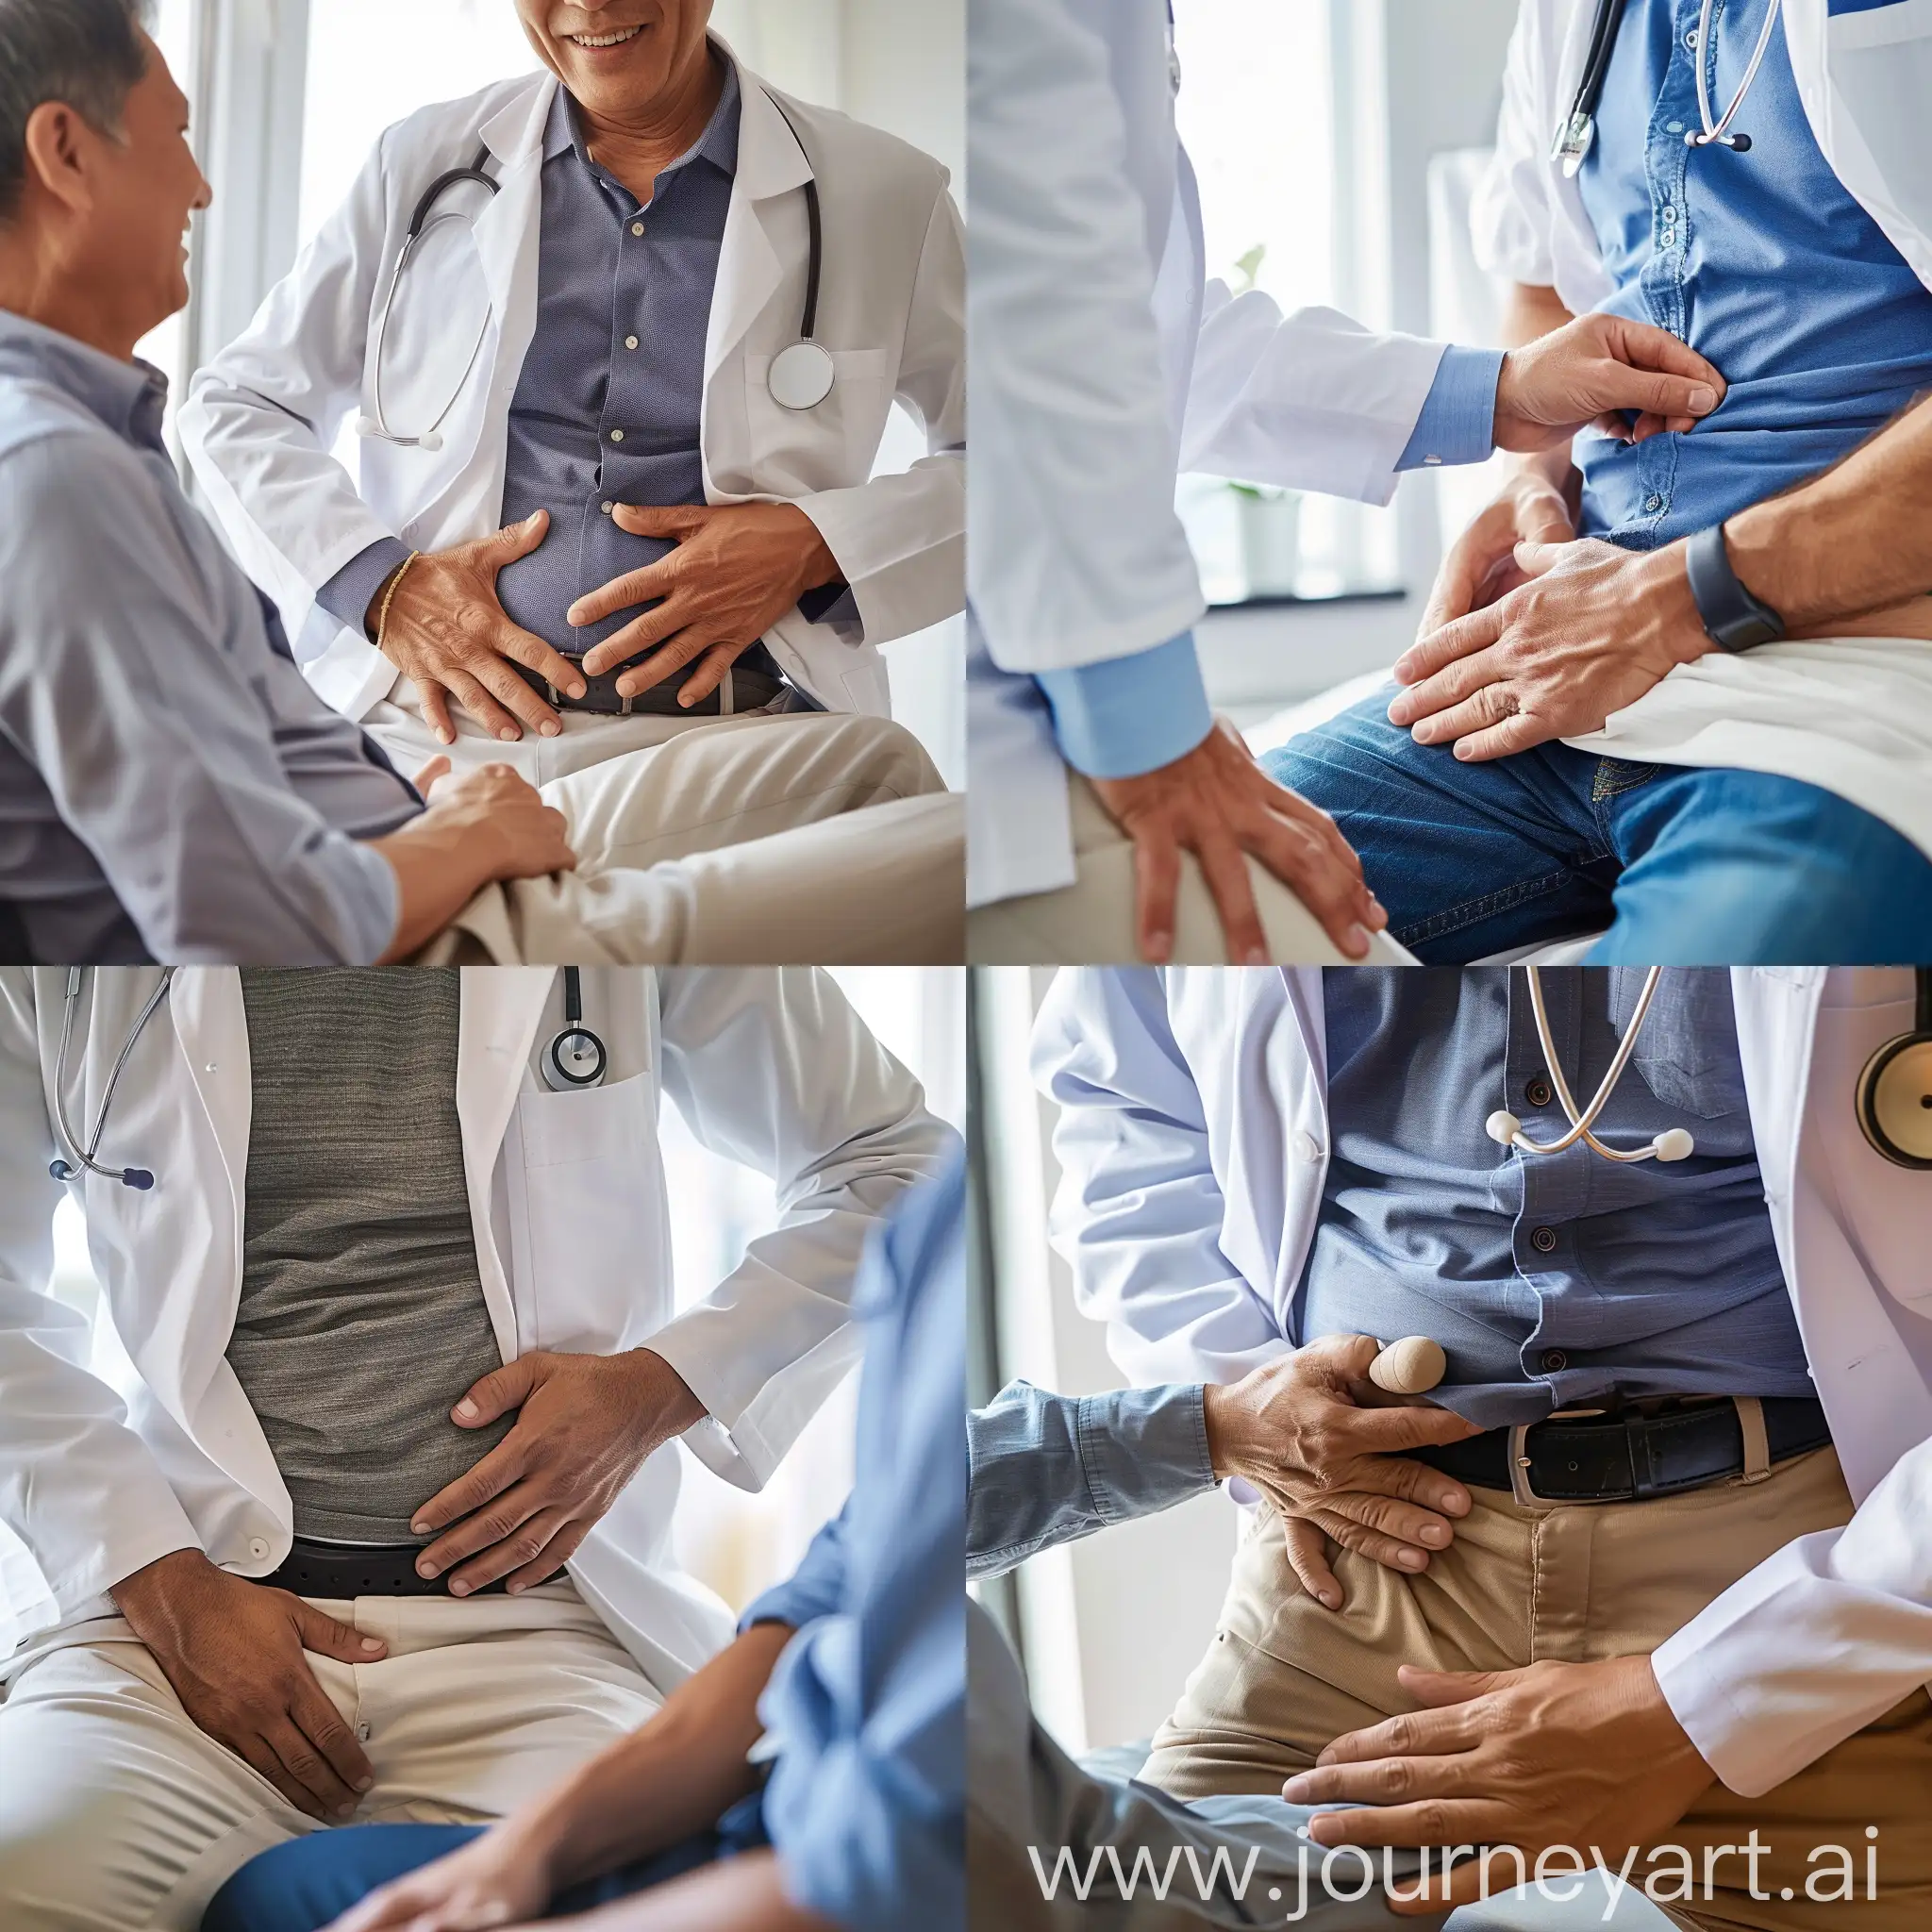 Medical-Examination-Doctor-Conducting-Abdominal-Palpation-on-Patient